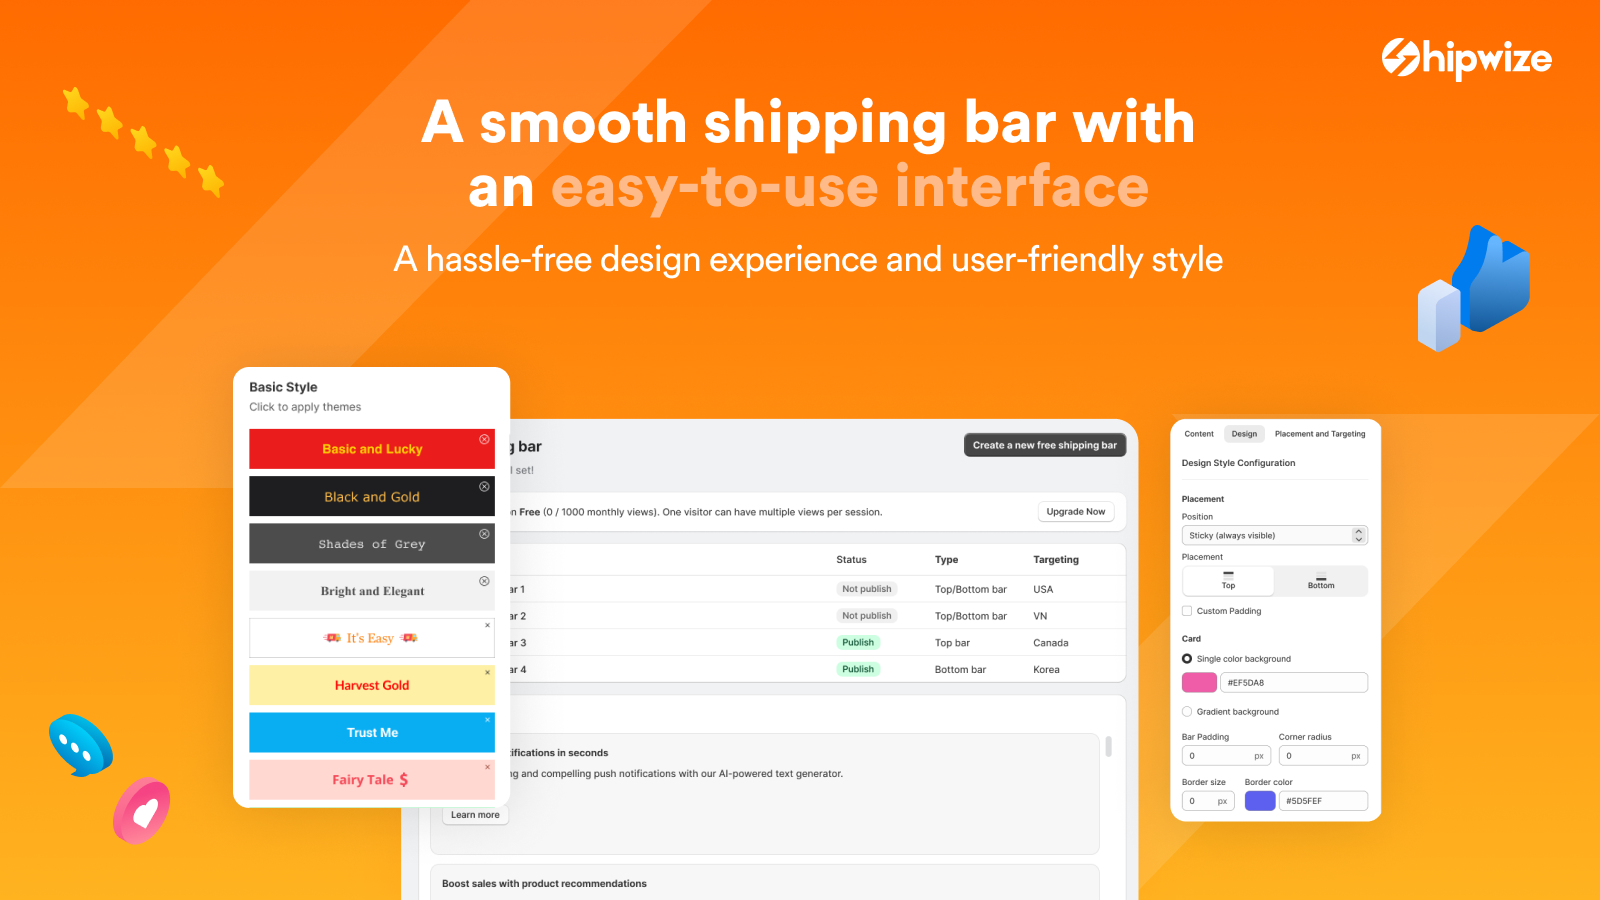 Upsell with personalized shipping bars